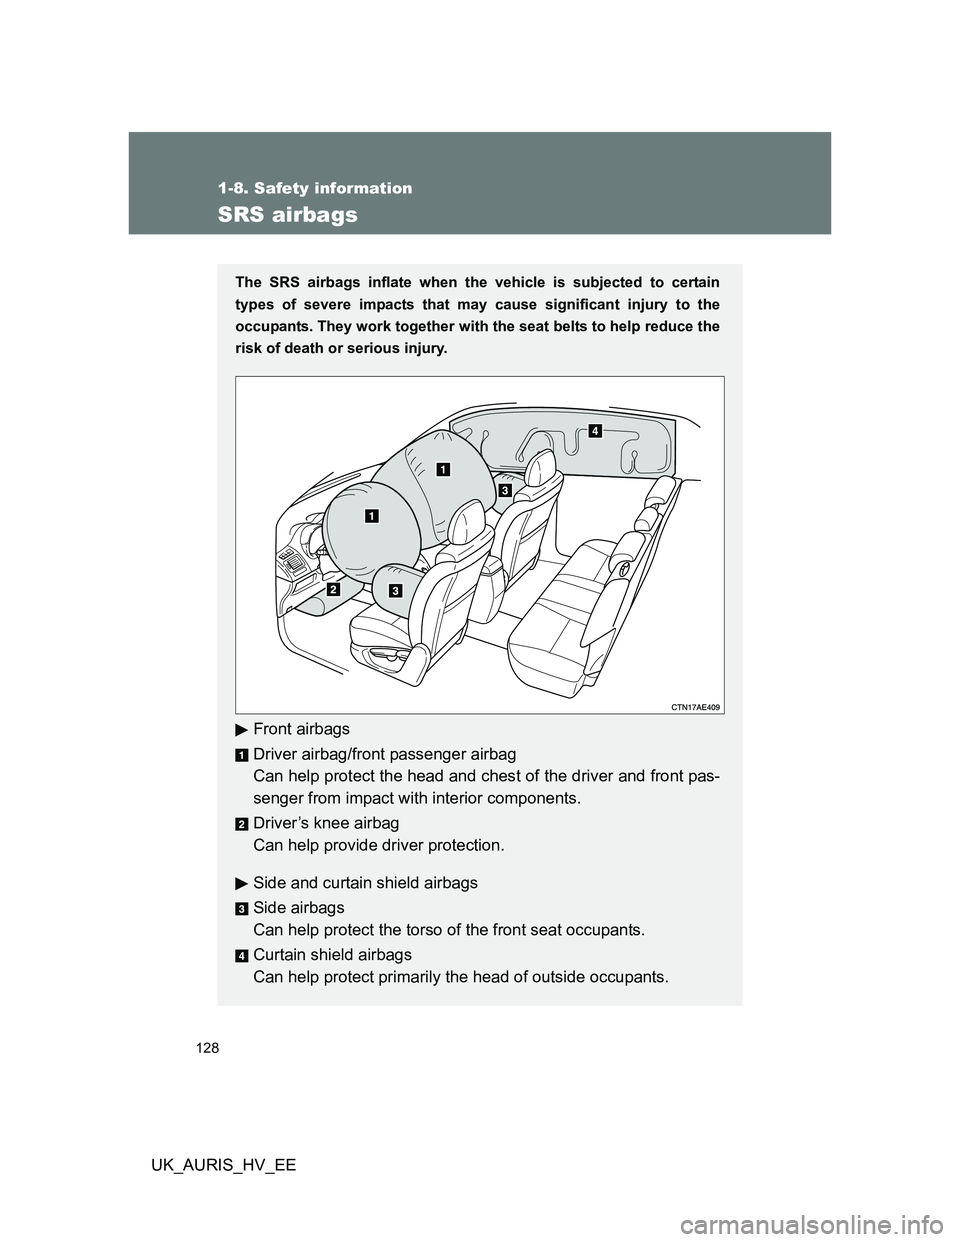 TOYOTA AURIS 2011  Owners Manual (in English) 128
1-8. Safety information
UK_AURIS_HV_EE
SRS airbags
The SRS airbags inflate when the vehicle is subjected to certain
types of severe impacts that may cause significant injury to the
occupants. They